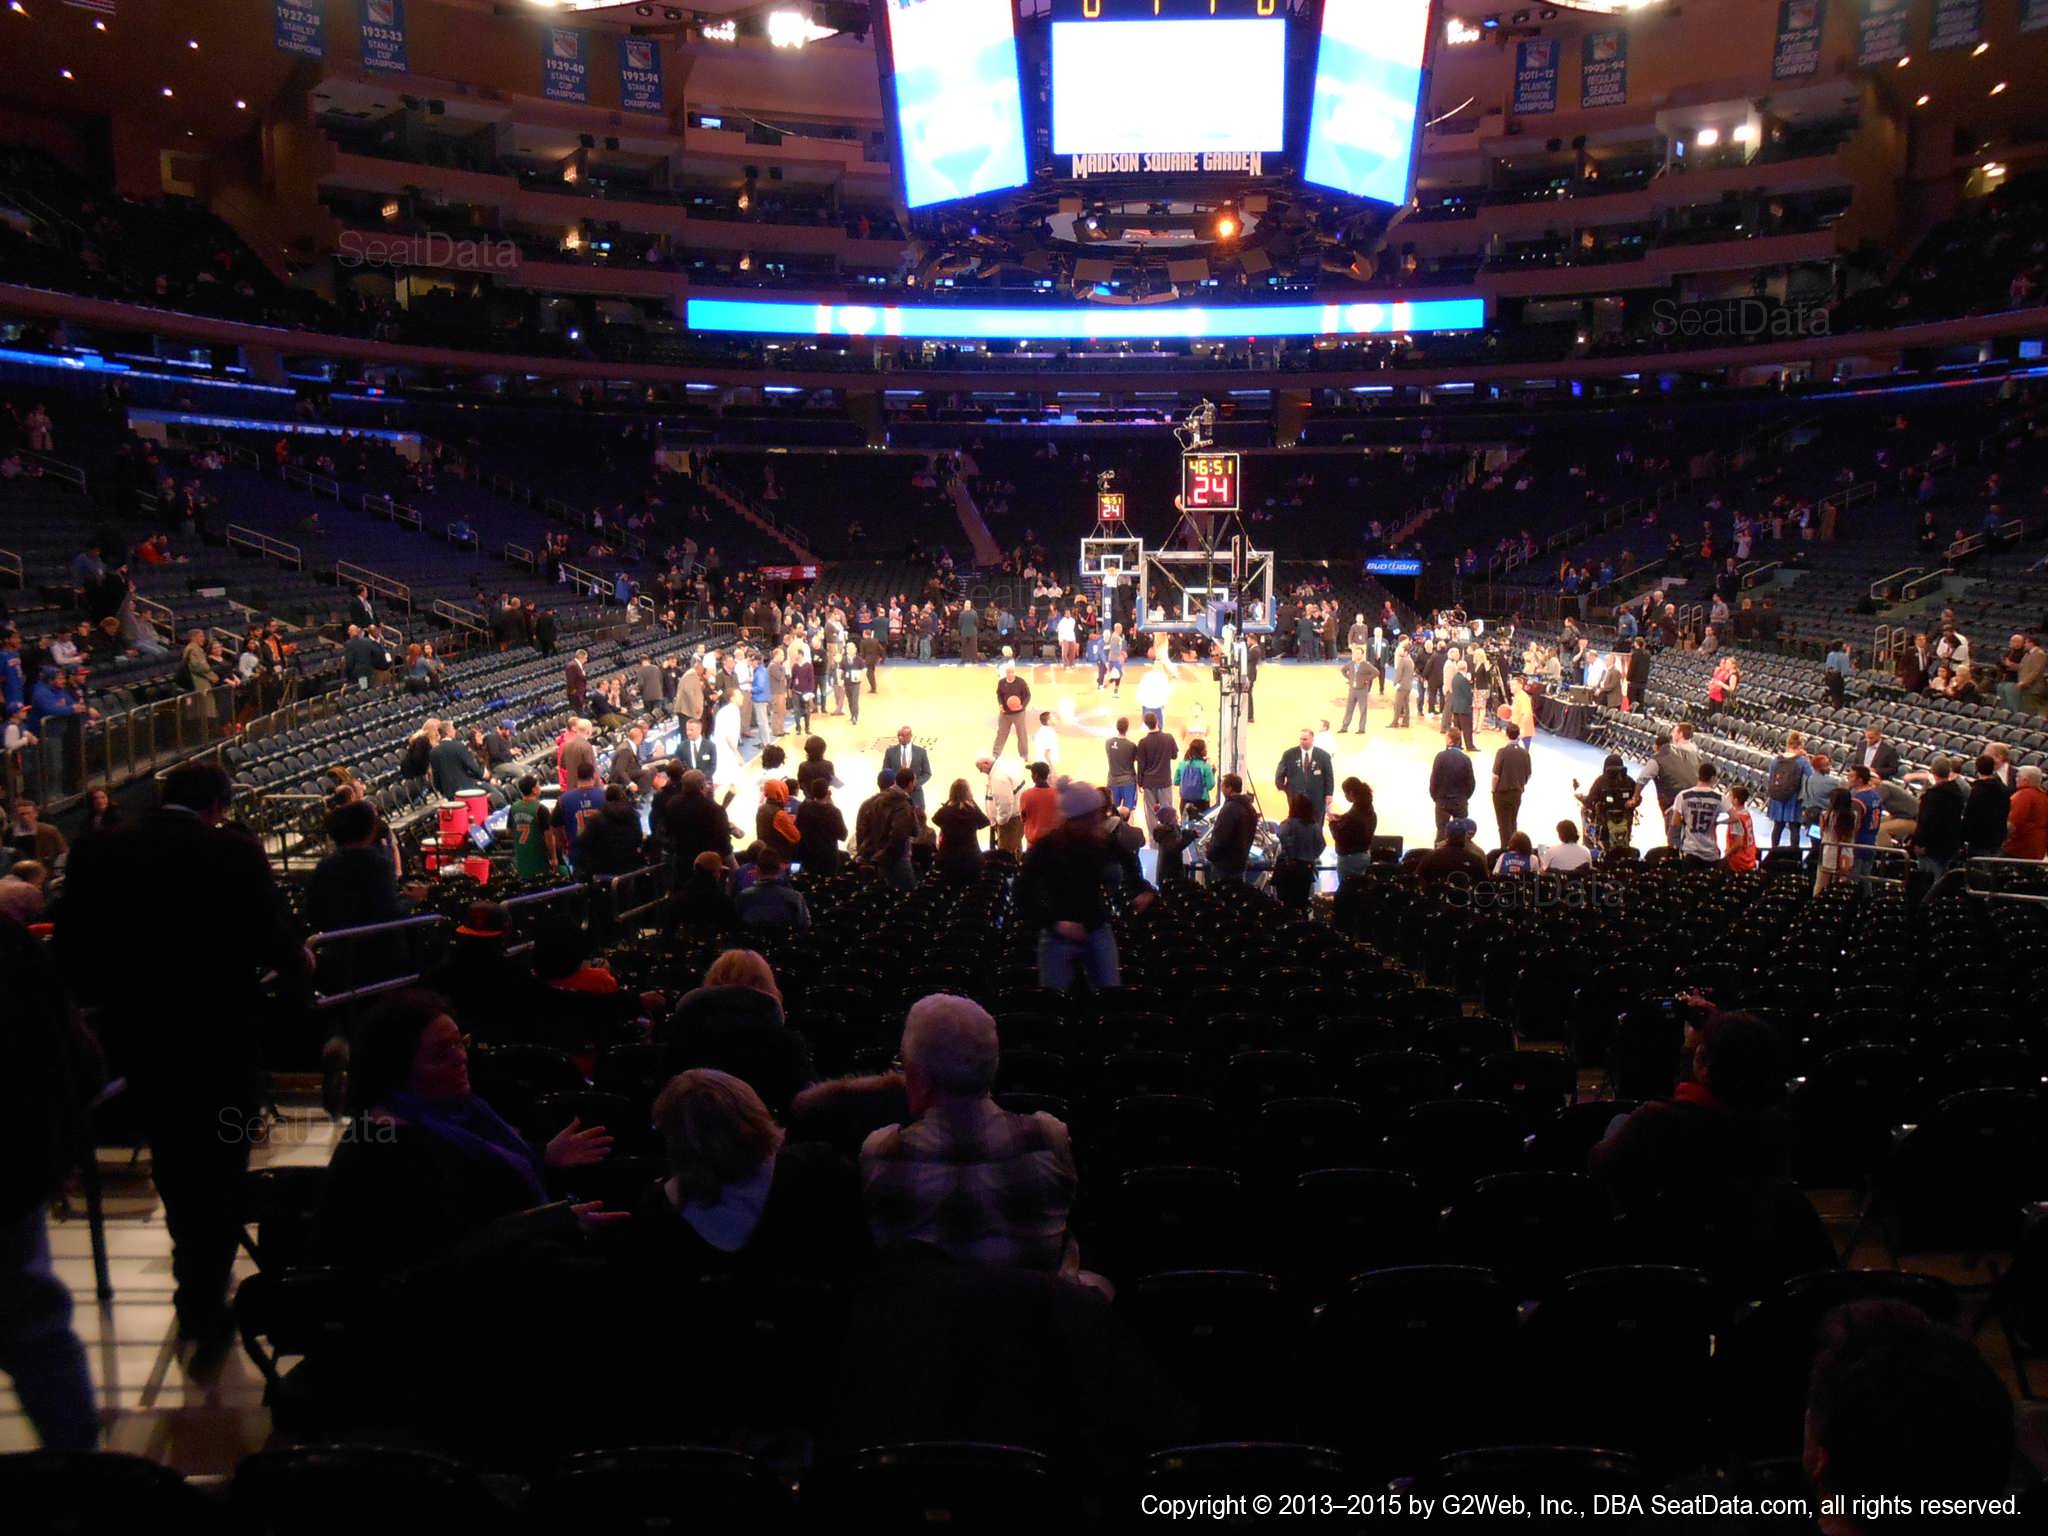 Msg Knicks Seating Chart View